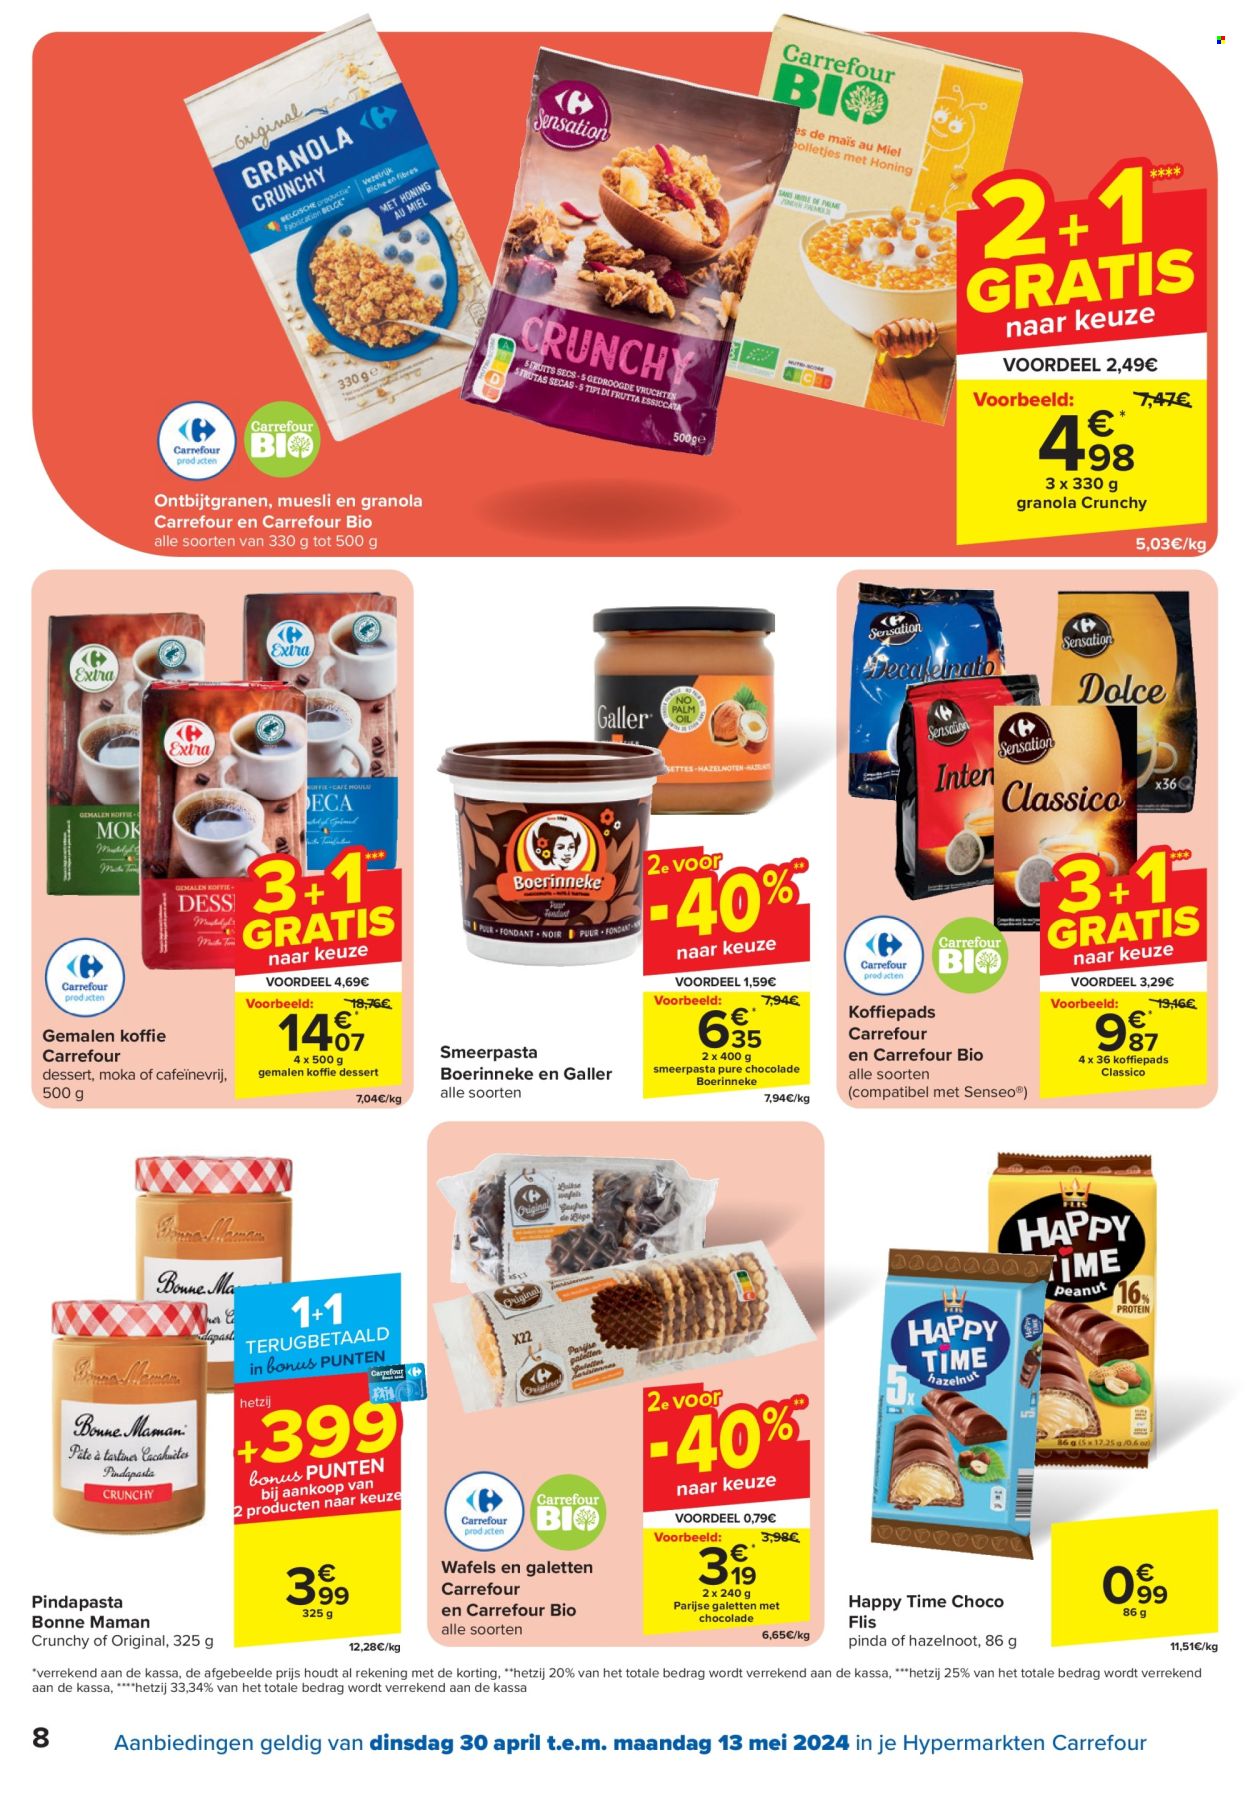 Catalogue Carrefour hypermarkt - 30.4.2024 - 13.5.2024. Page 8.